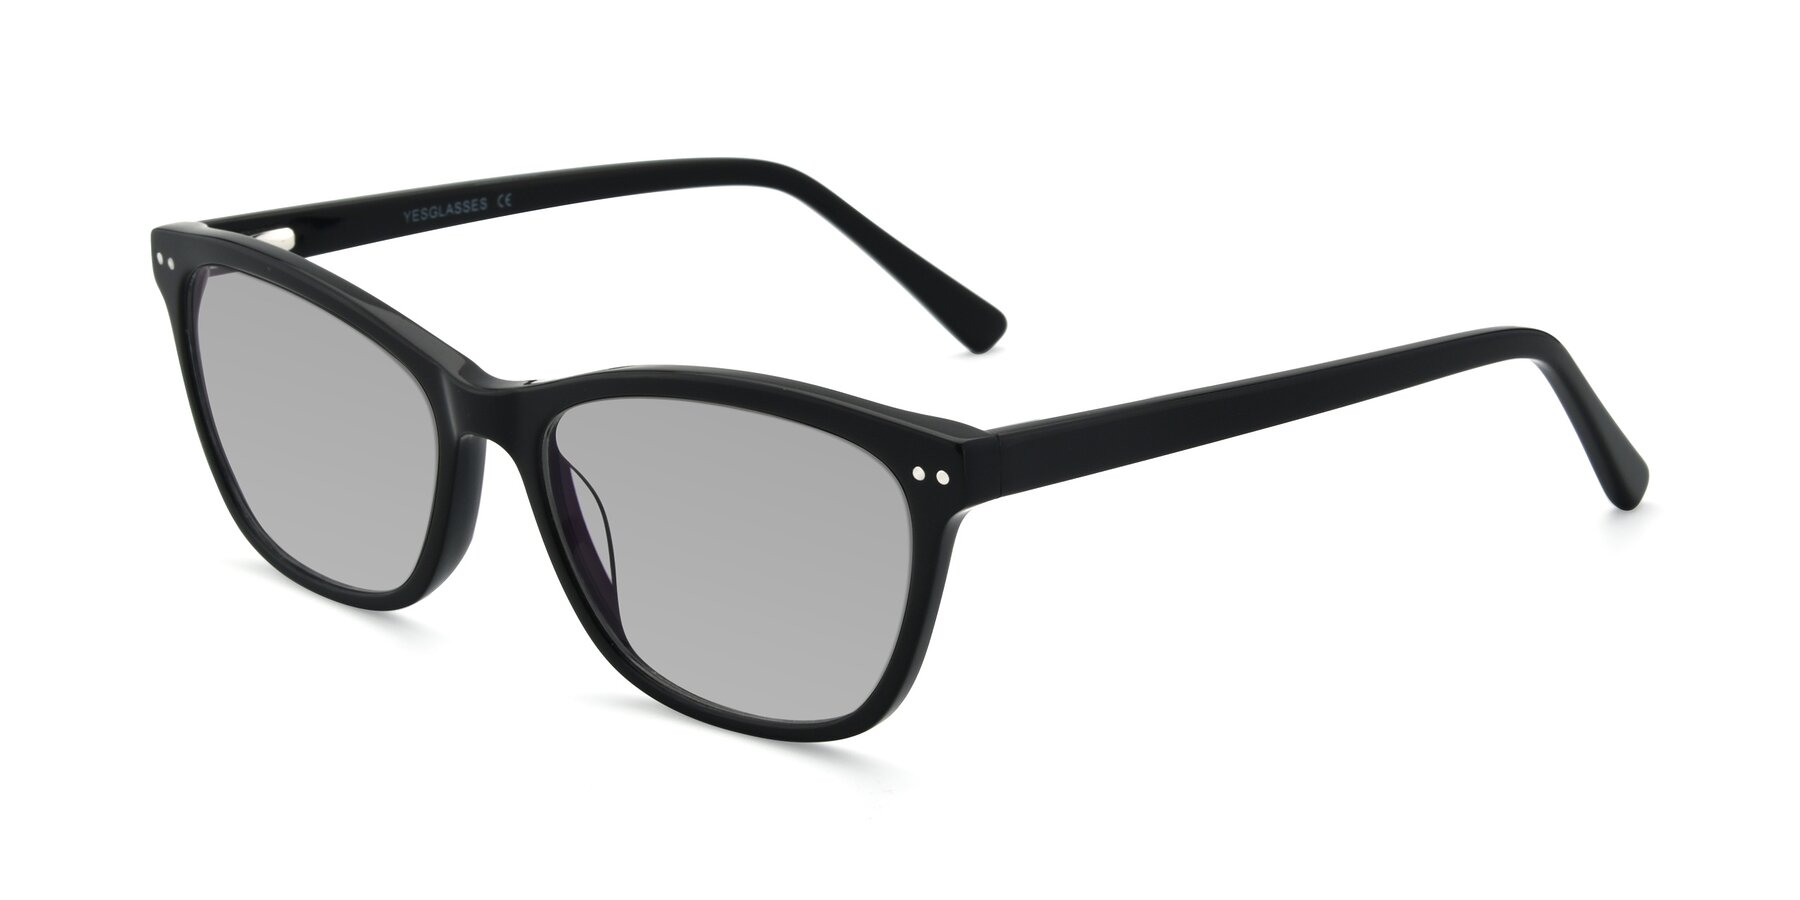 Angle of 17350 in Black with Light Gray Tinted Lenses